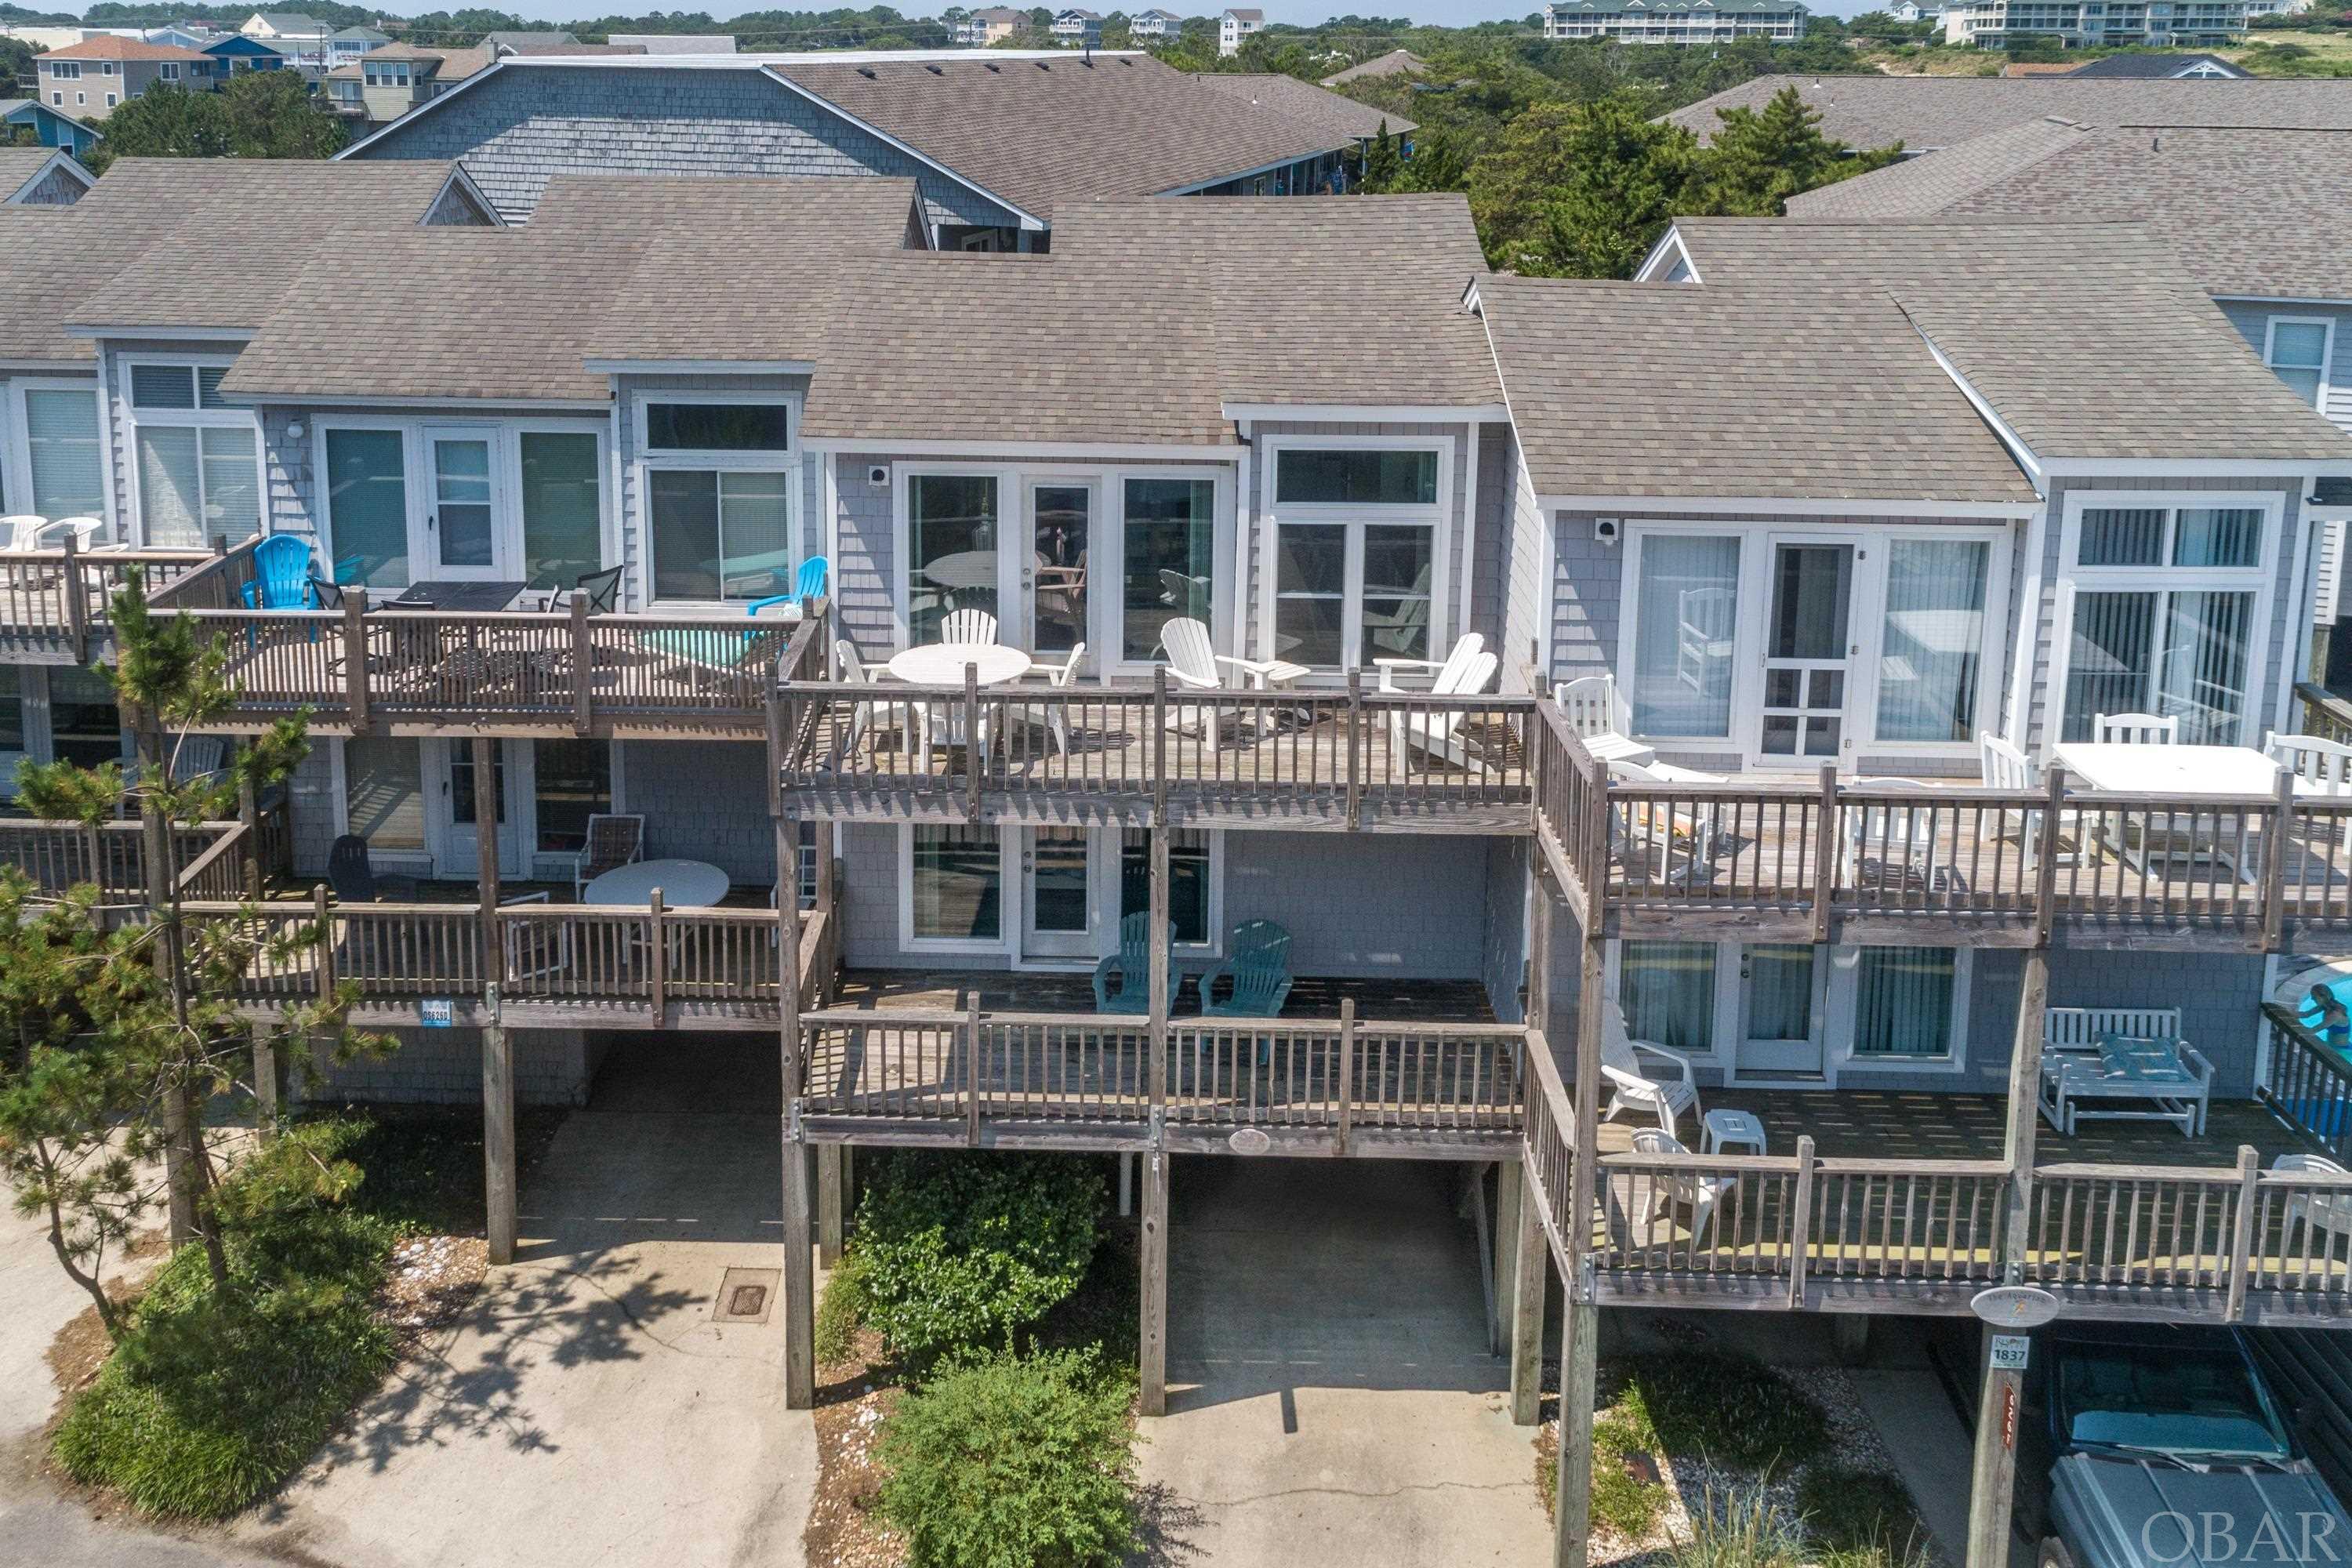 626 E Sand Fiddler Circle, Corolla, NC 27927, 2 Bedrooms Bedrooms, ,2 BathroomsBathrooms,Residential,For Sale,Sand Fiddler Circle,119978